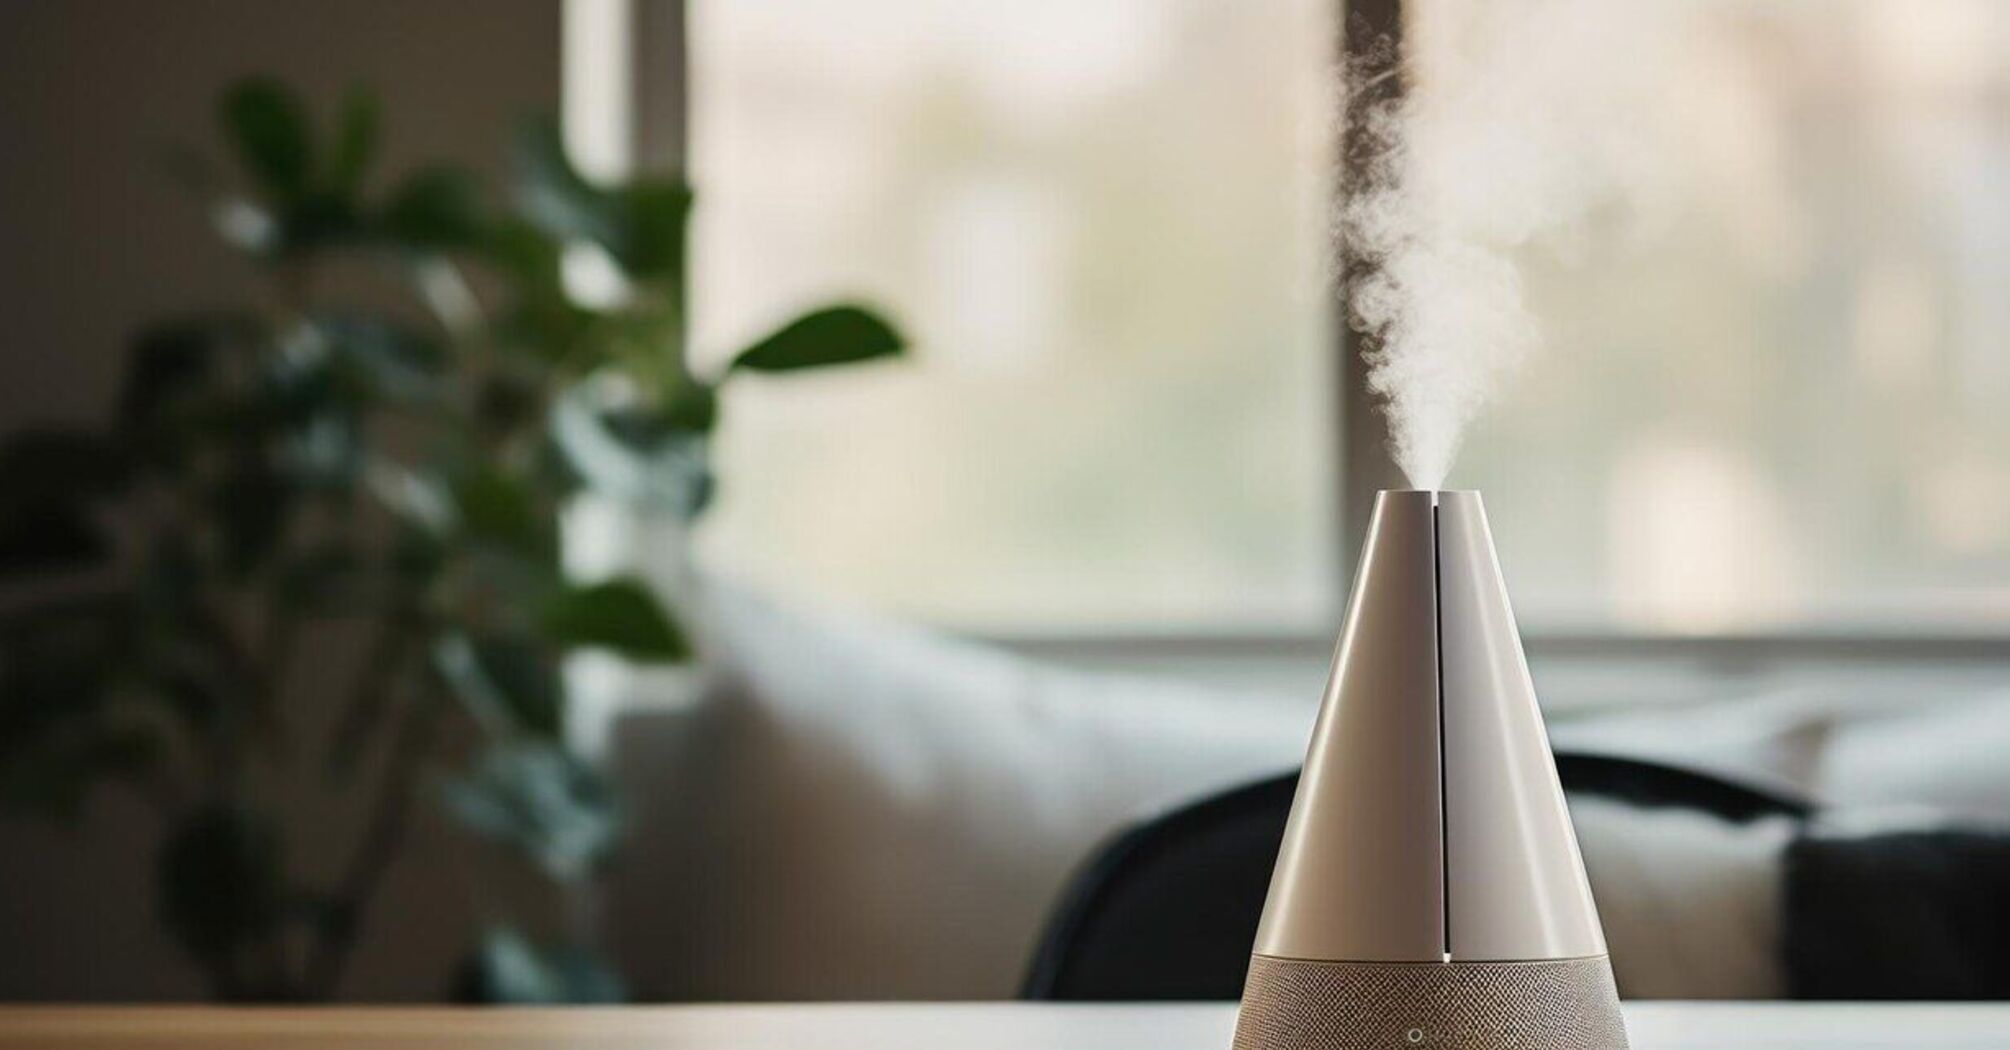 How to humidify the air in an apartment: effective life hacks